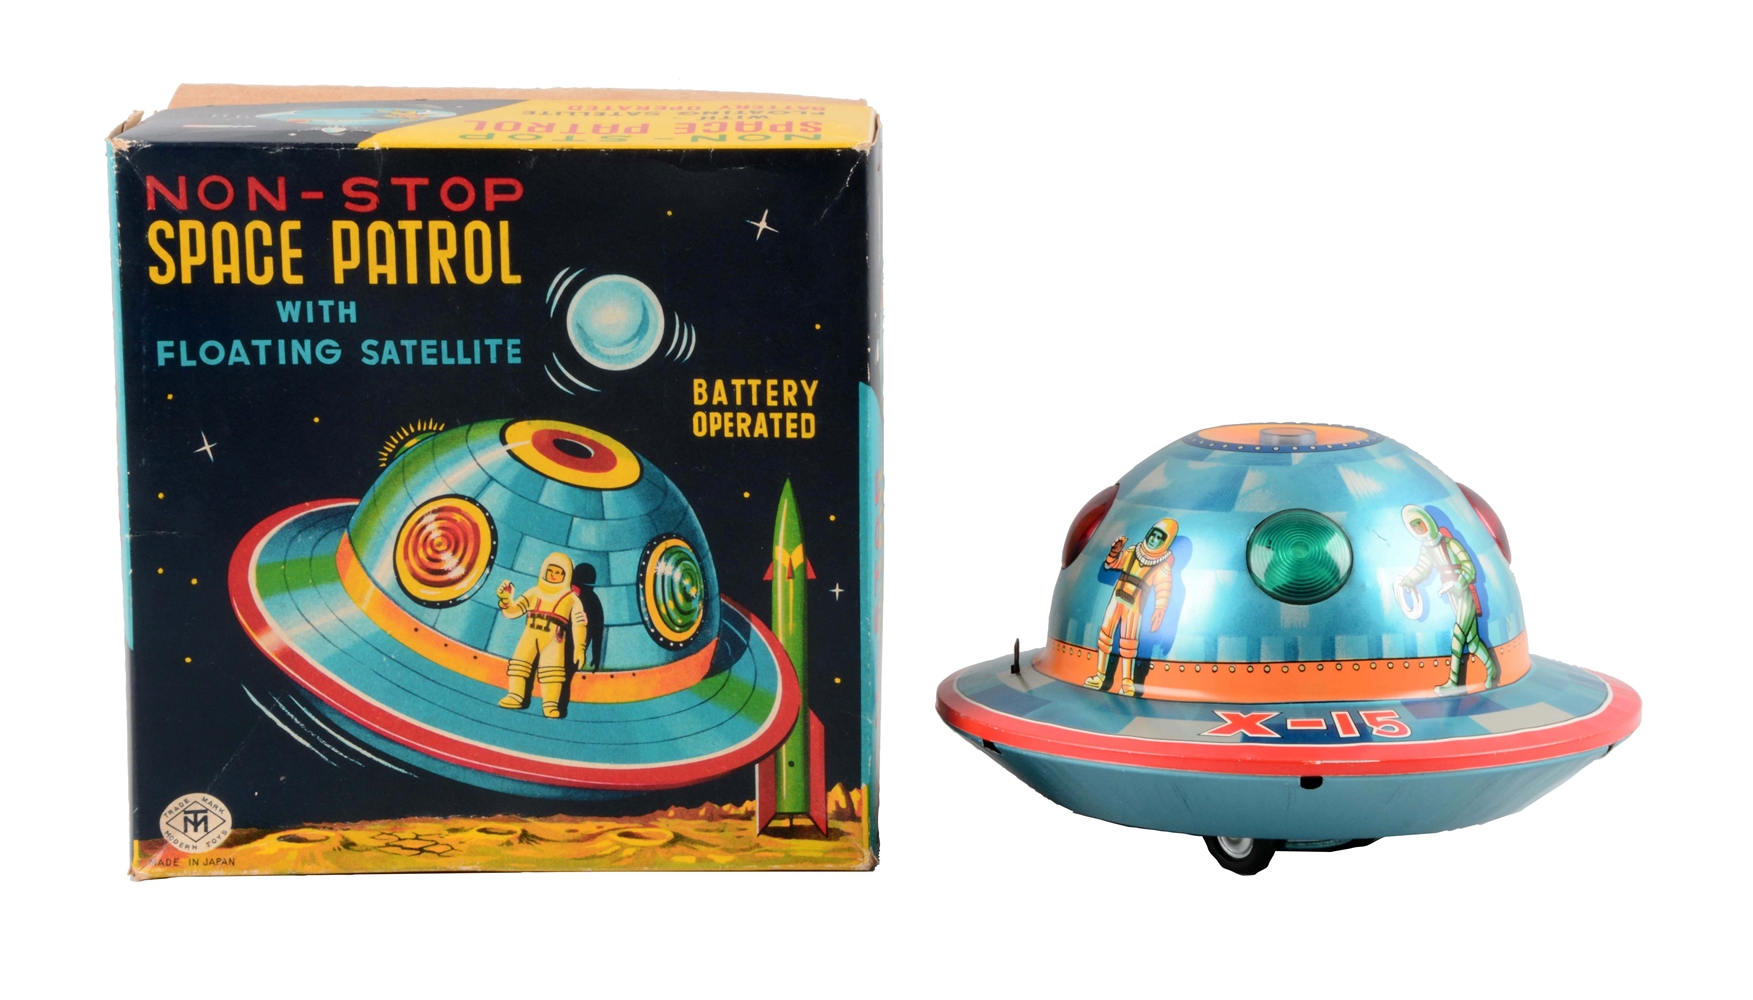 JAPANESE TIN LITHO BATTERY OPERATED NON-STOP SPACE PATROL.  